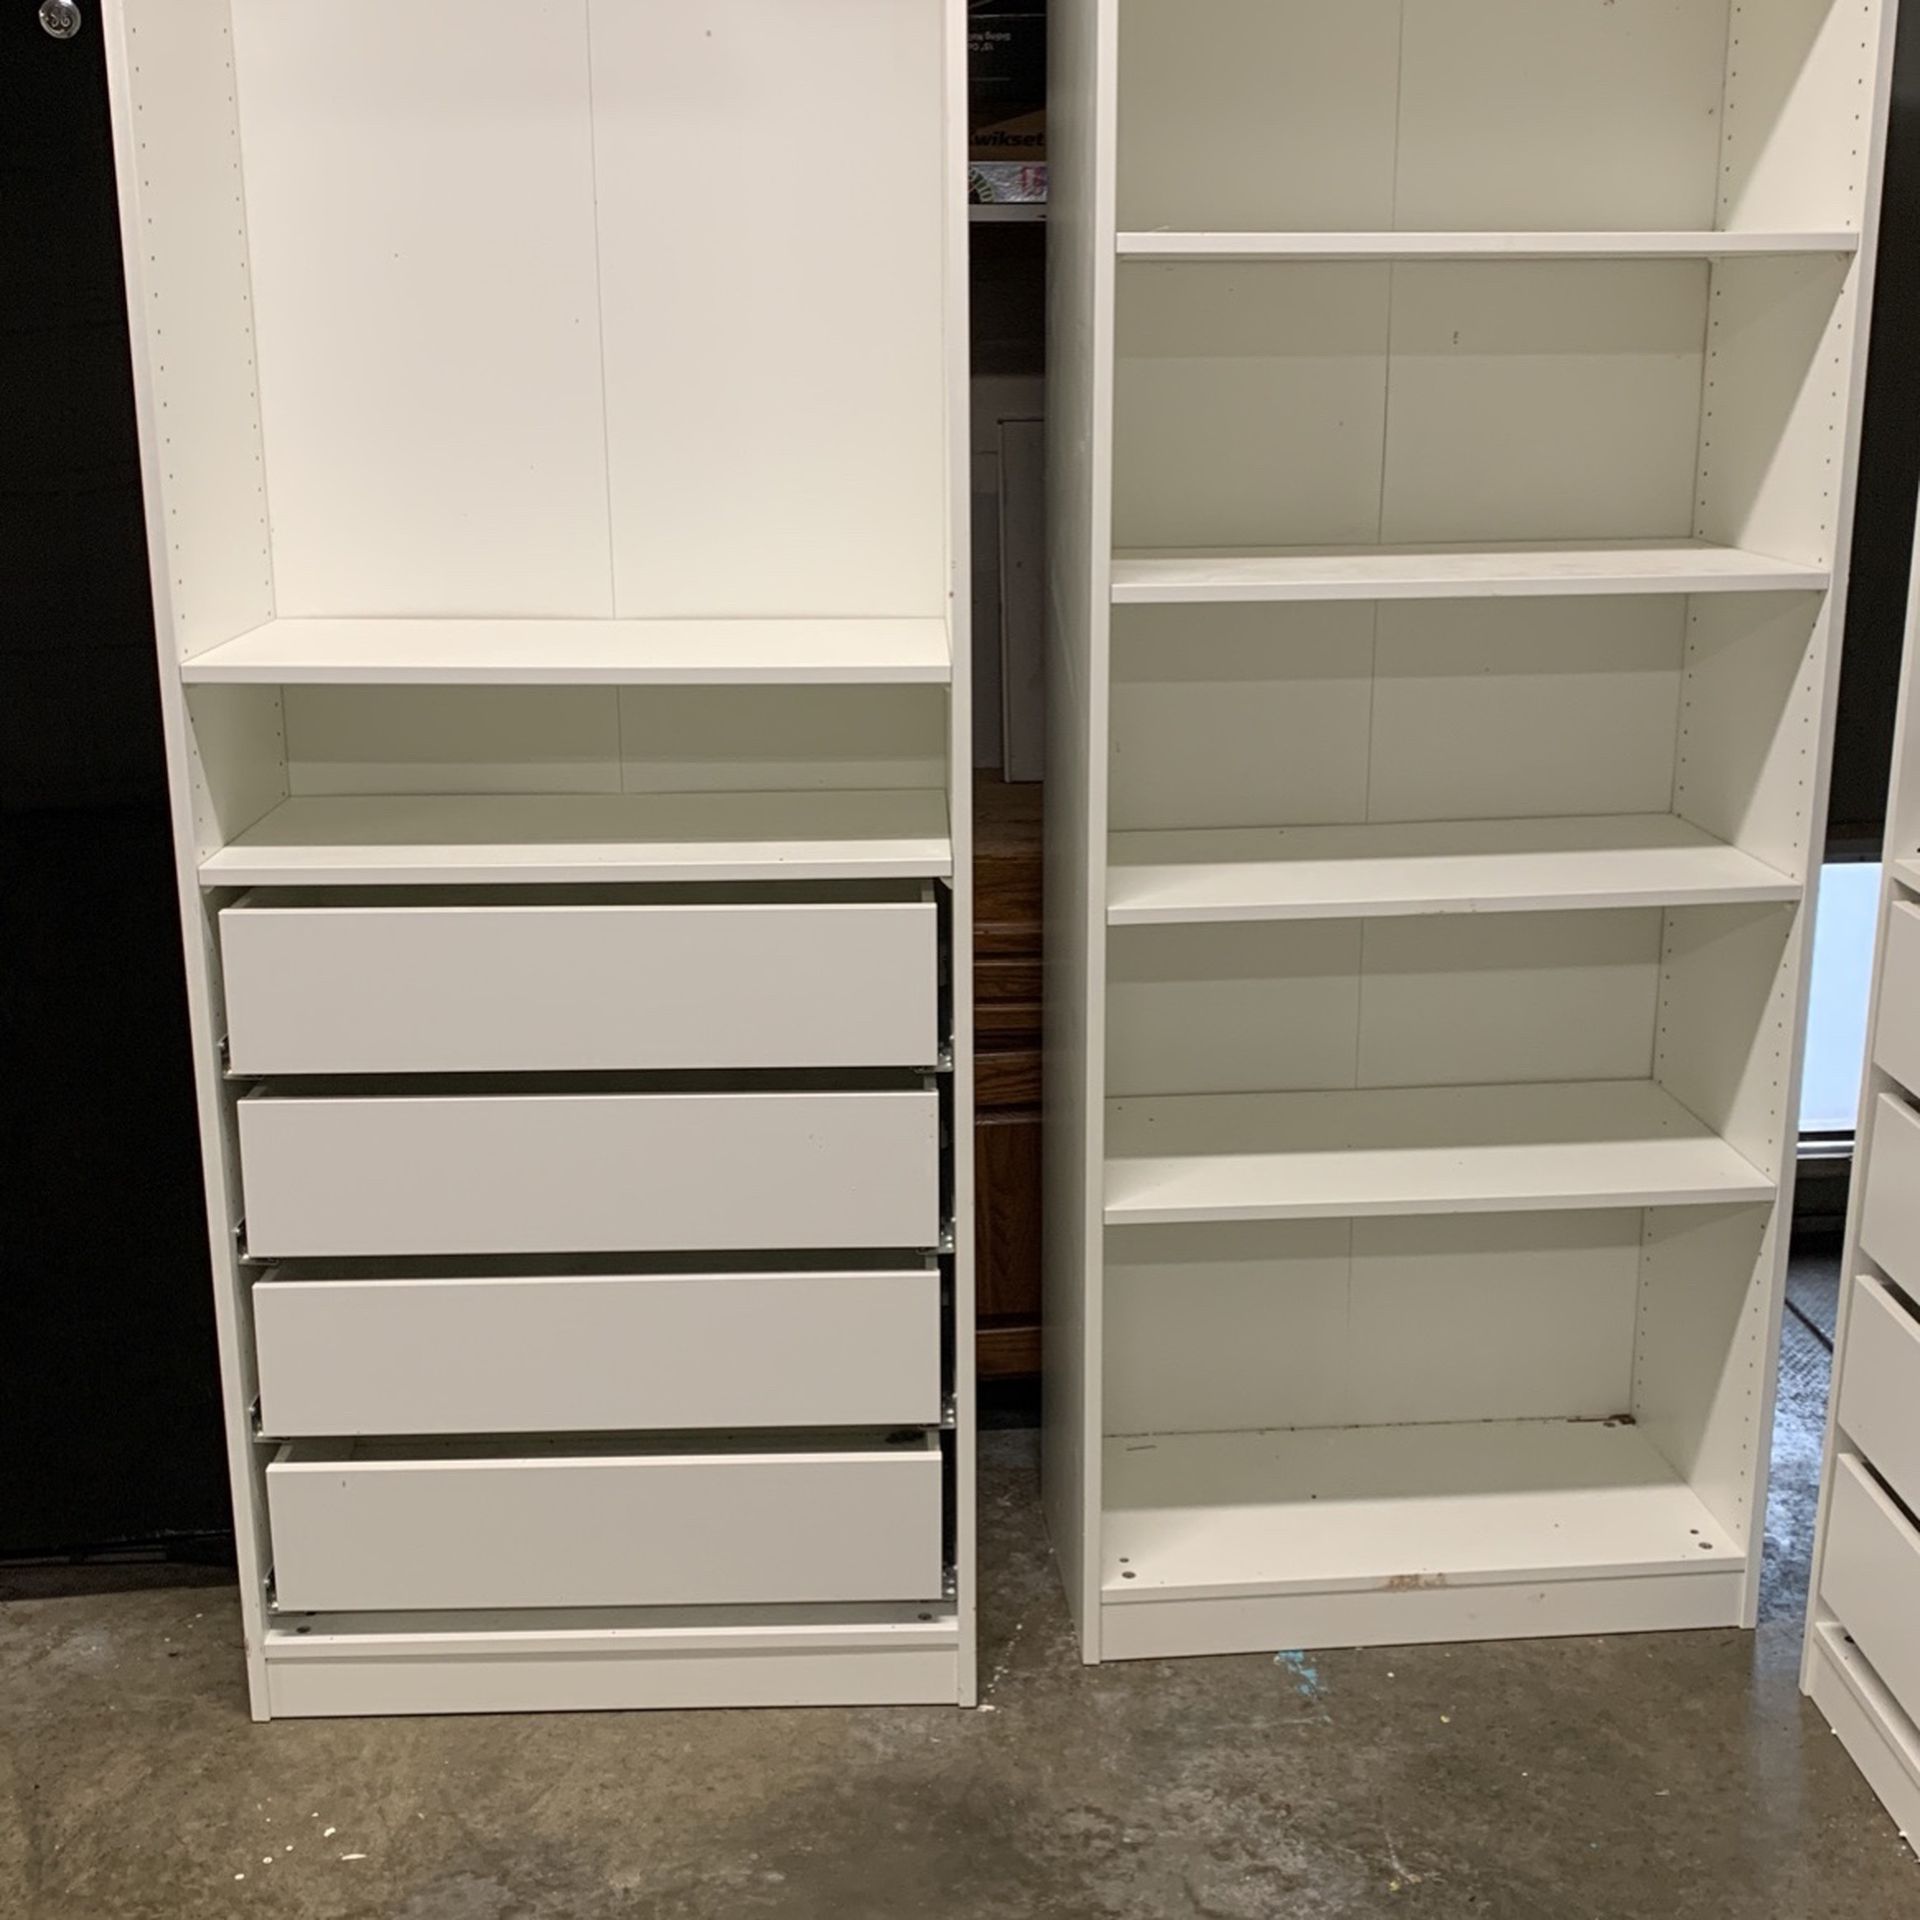 IKEA Closet with shelves and drawers